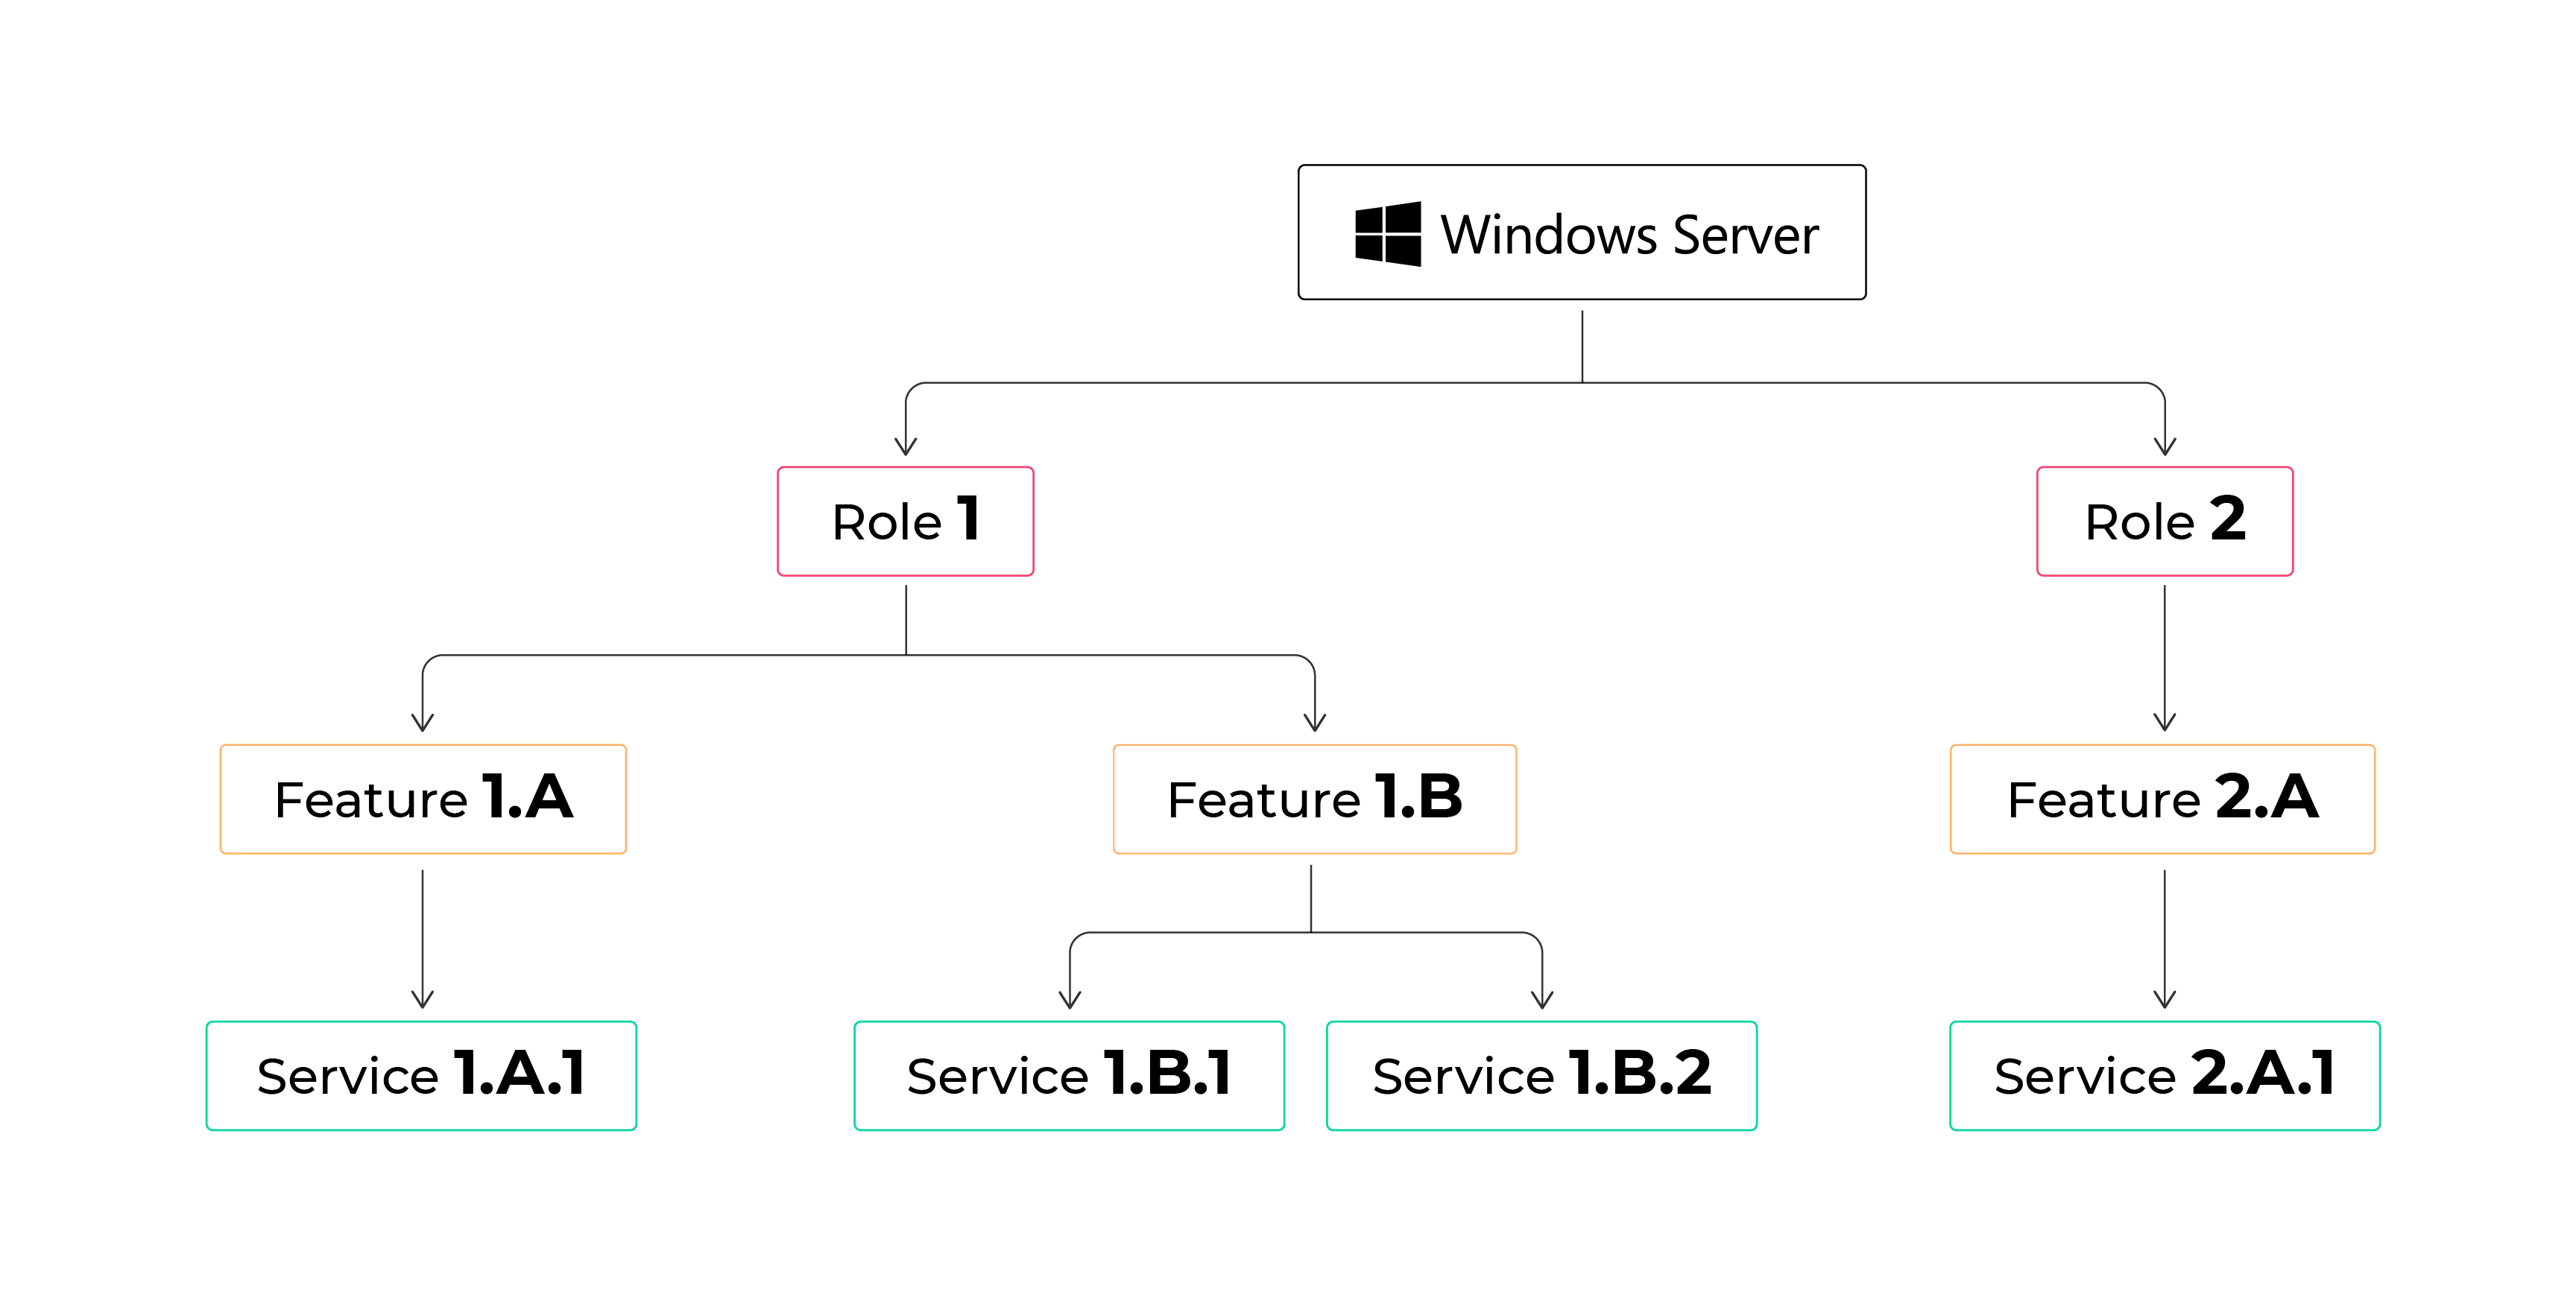 How Windows Server is organized into roles, features, and services